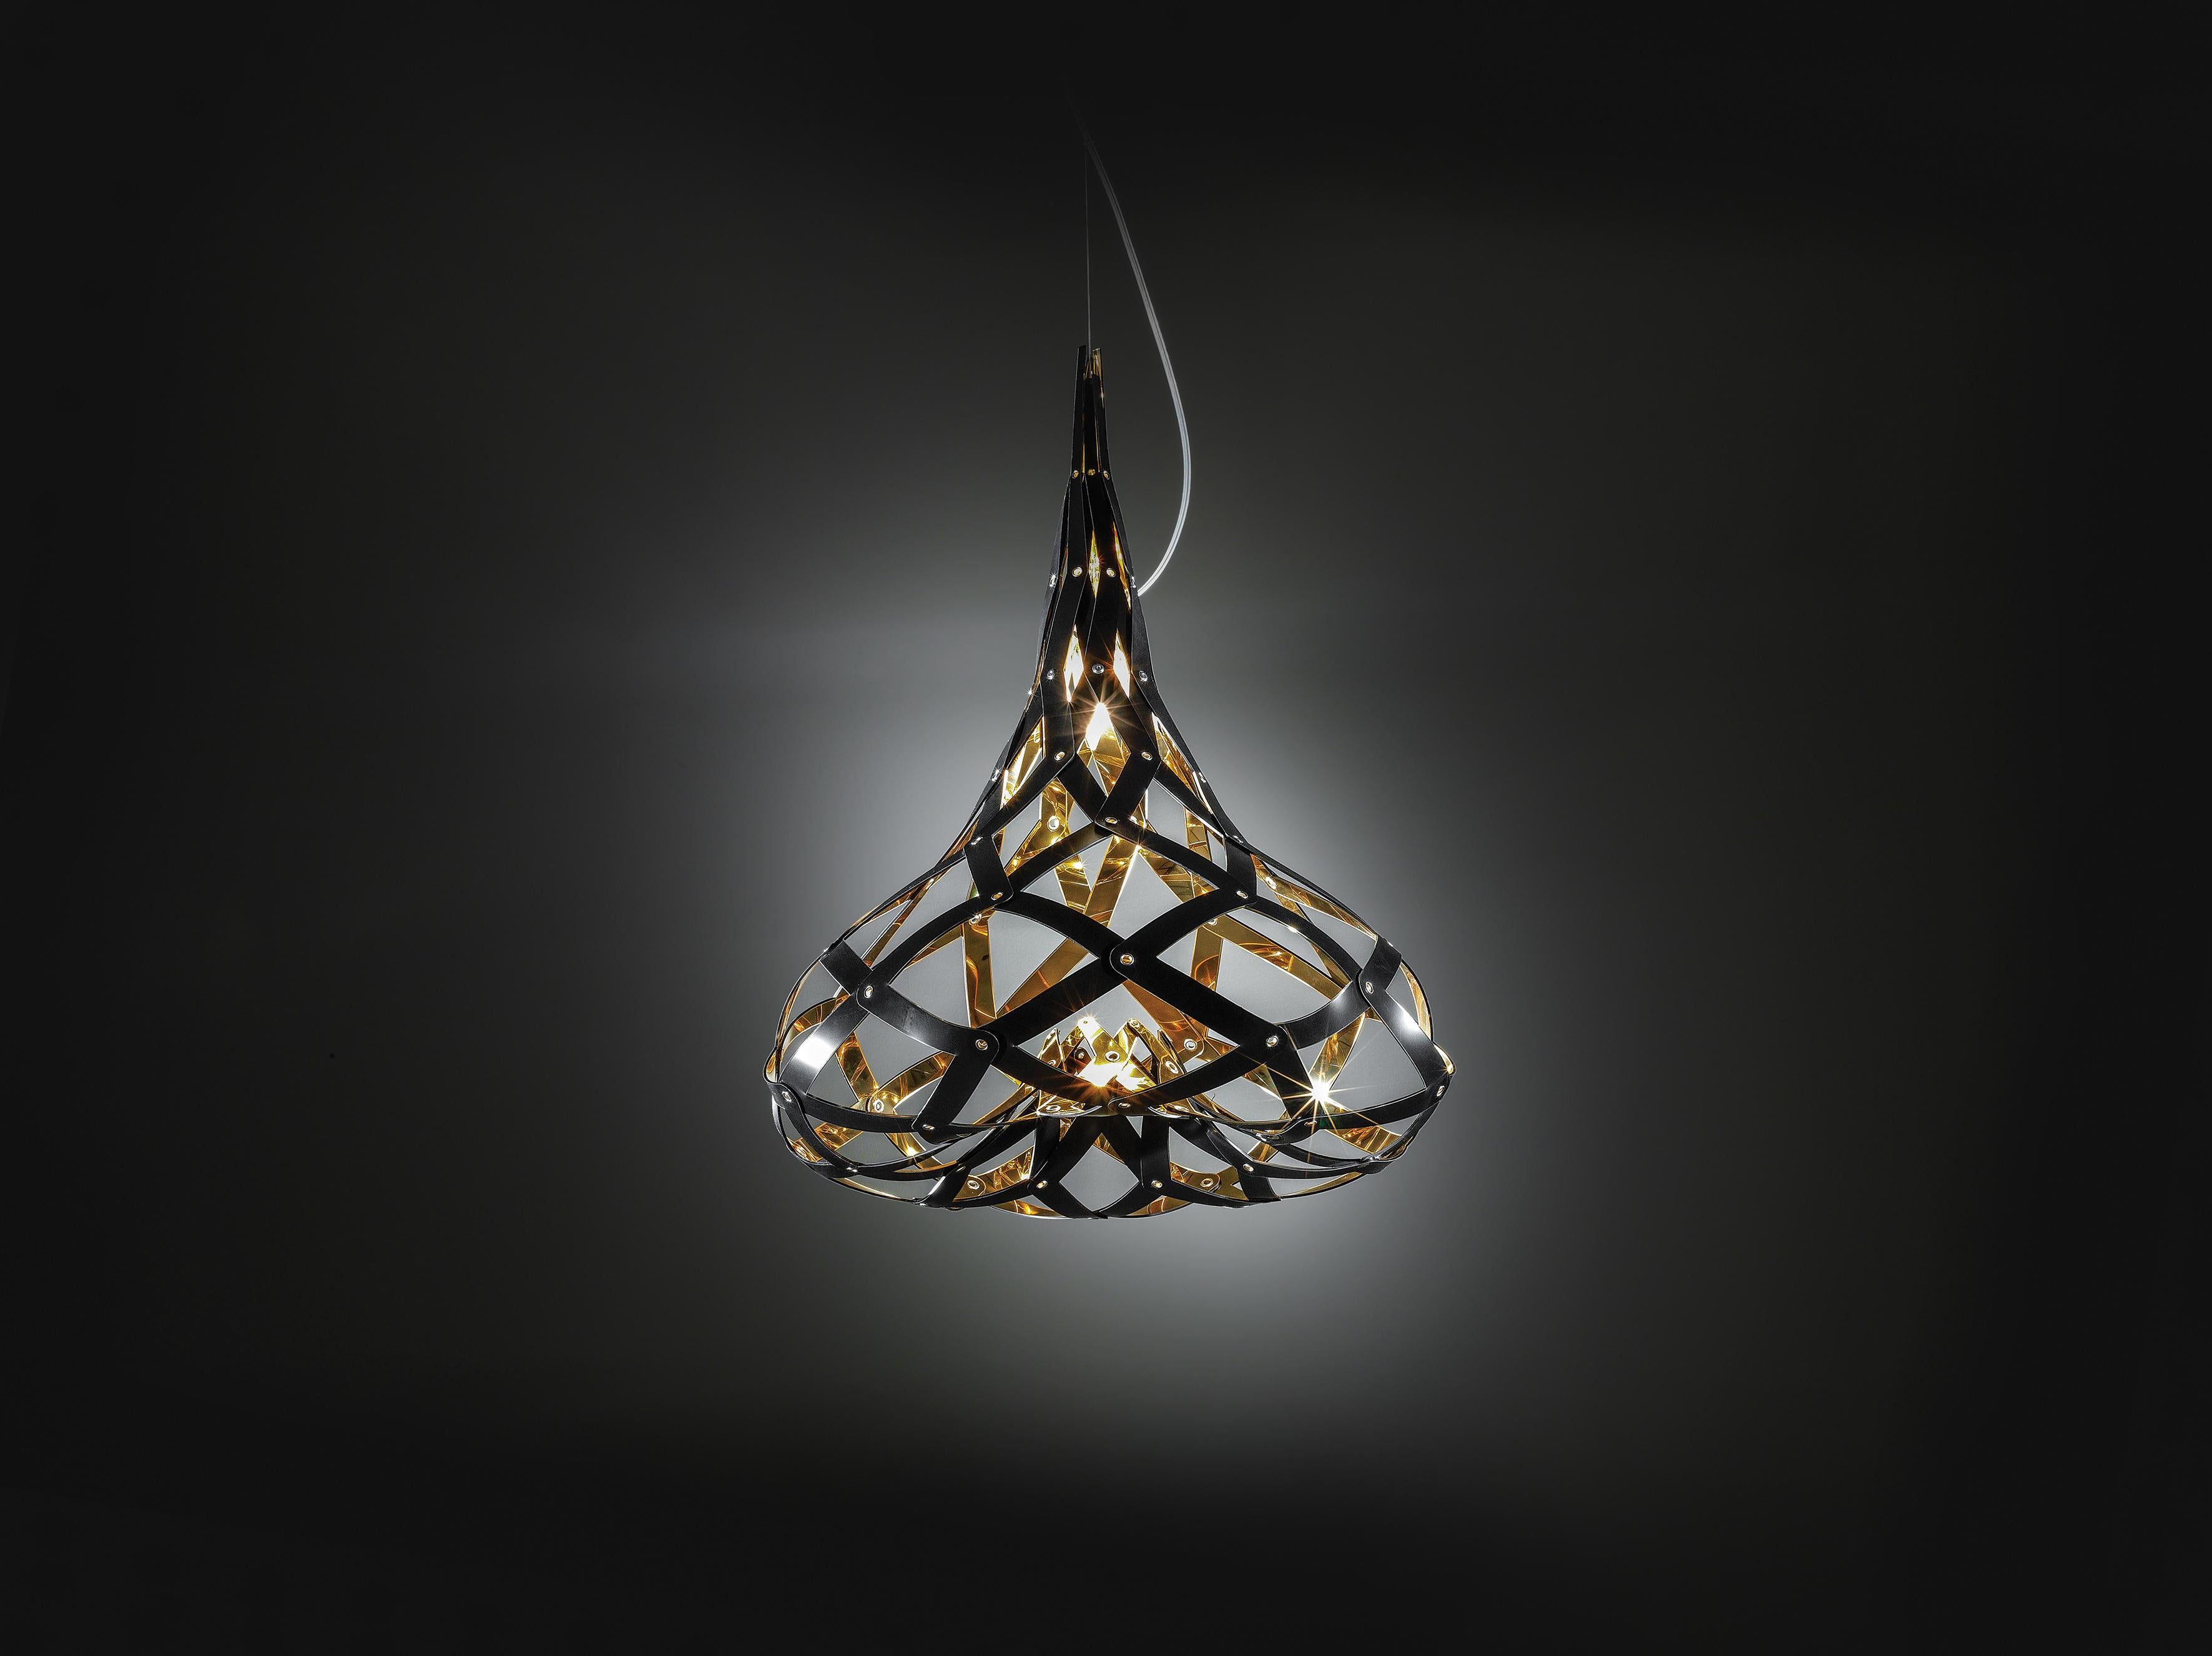 Legendary, splendid, and captivating, with a shape that conjures up images of an alchemist’s vials, this lamp brings a touch of magic to any interior. Its almost invisible cable adds to the enchantment, and when seen from below, it resembles the